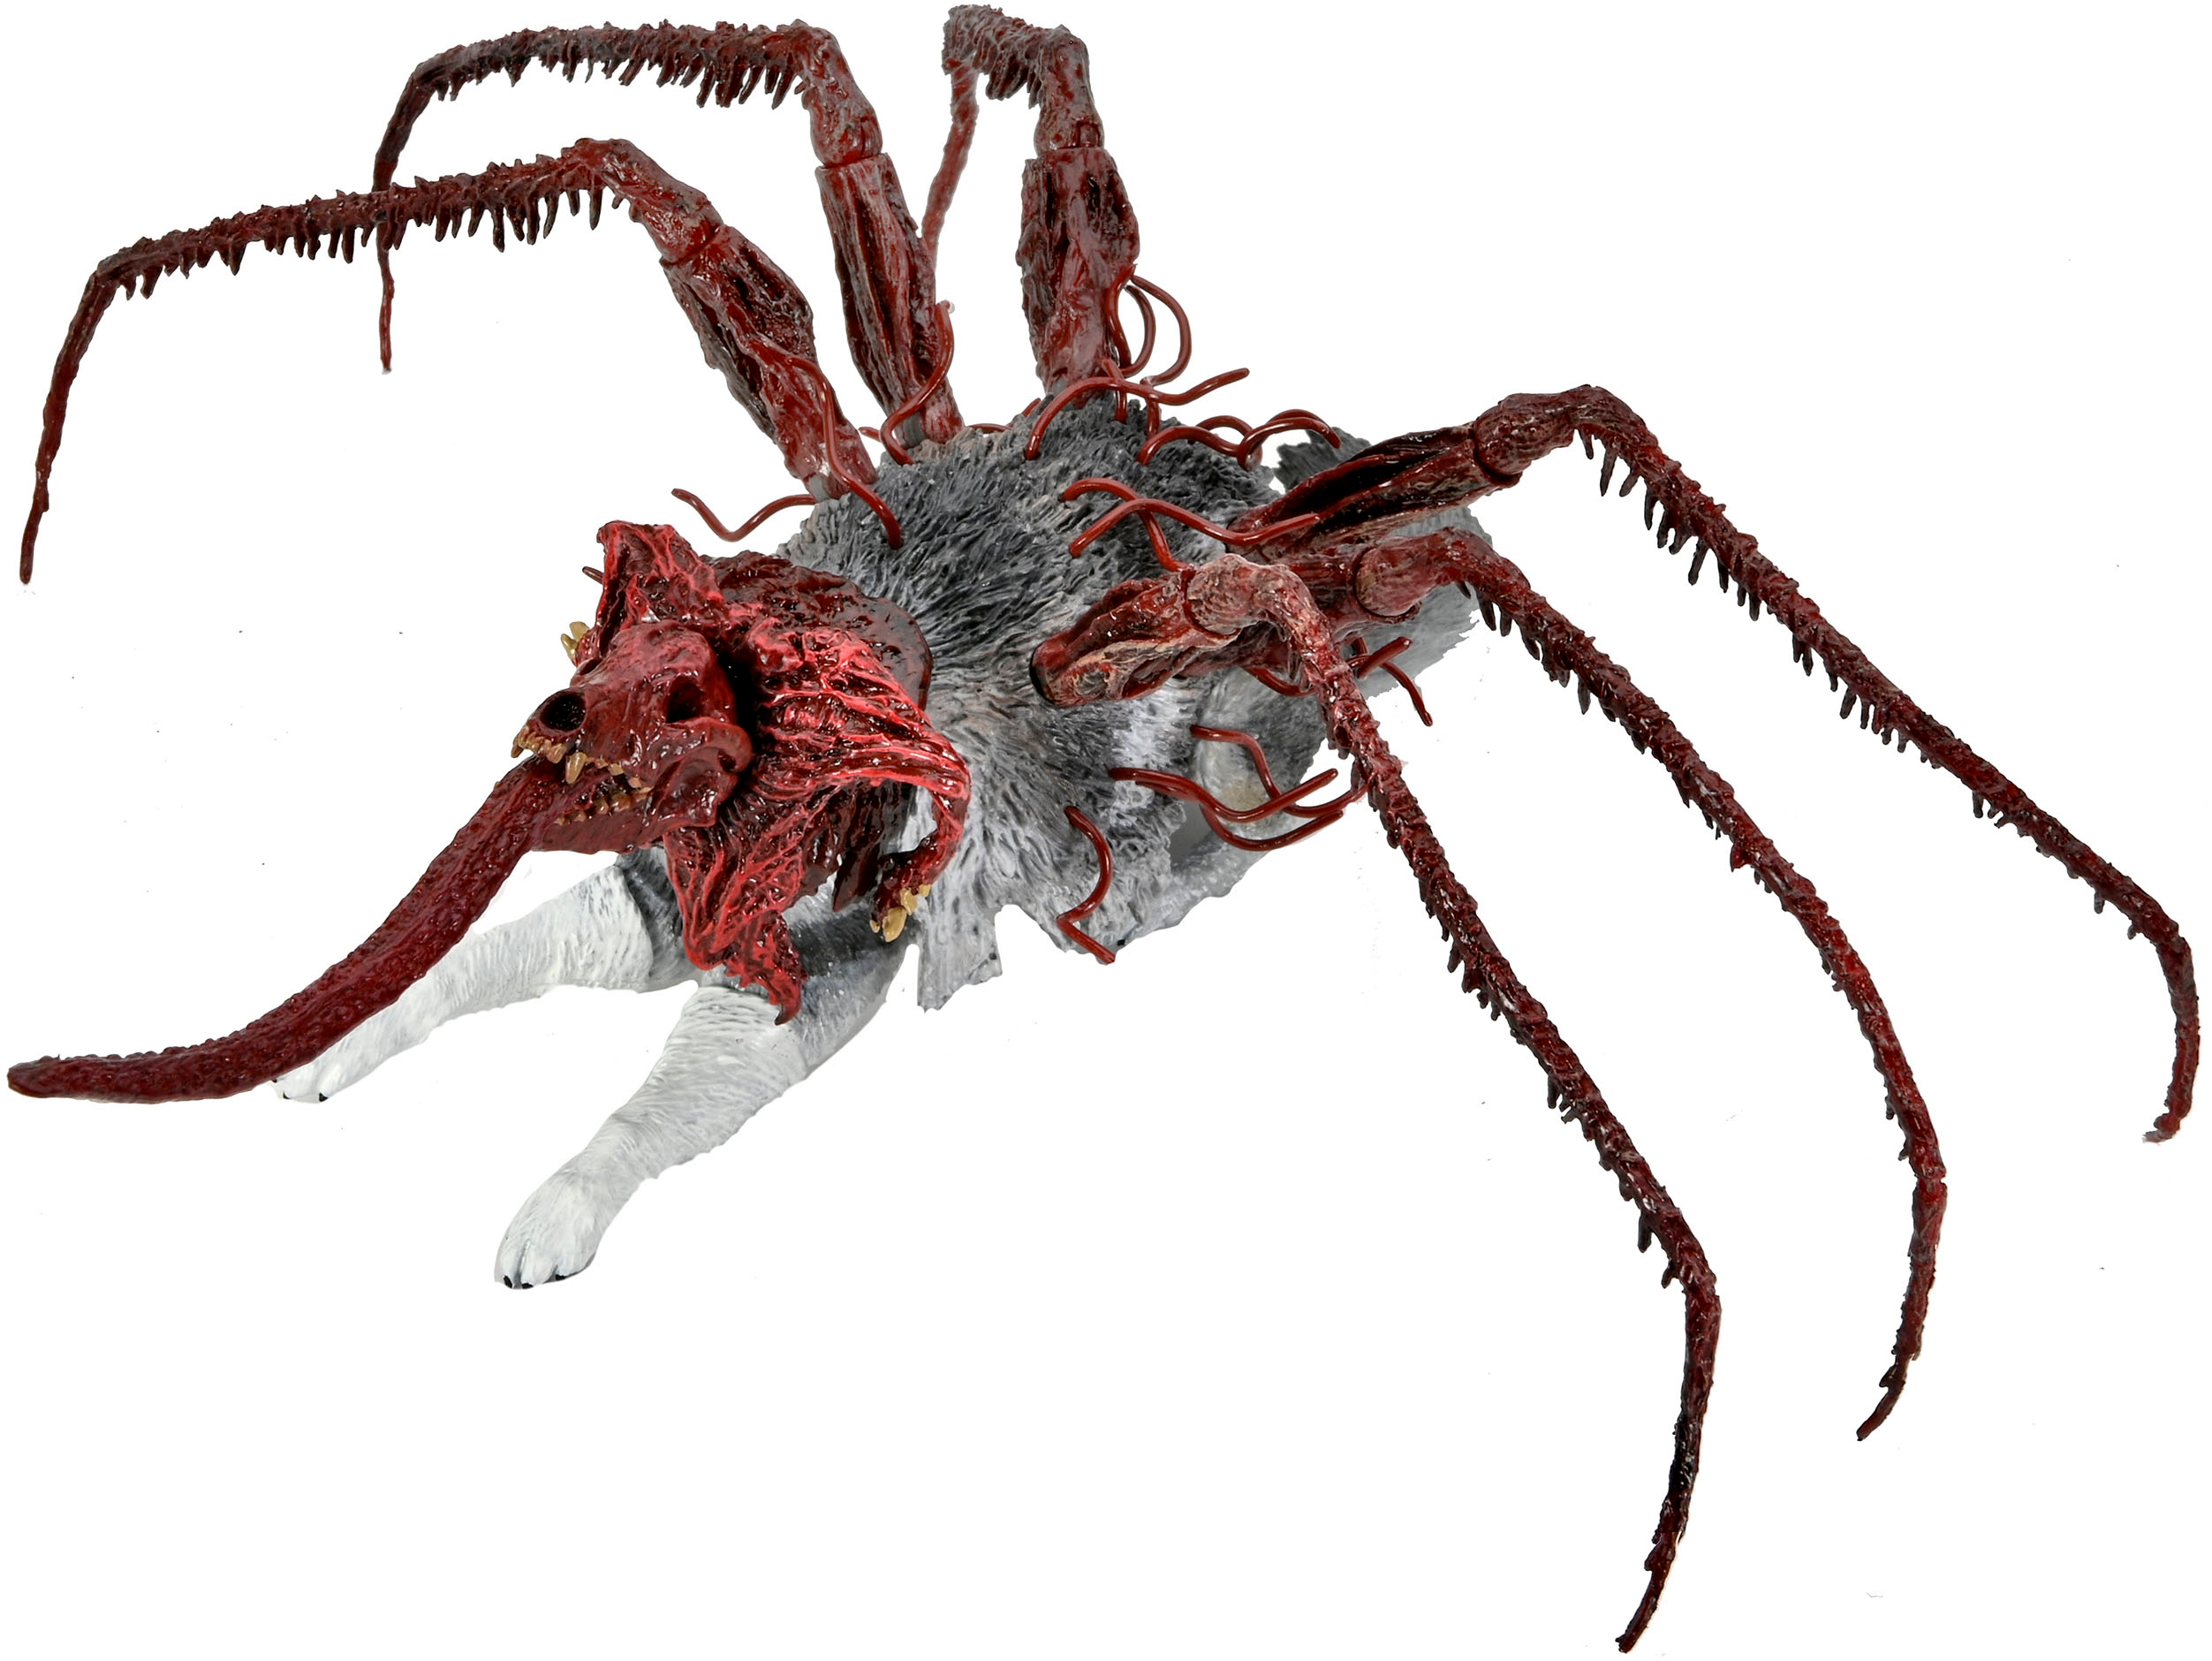 The Thing Ultimate Dog Creature Deluxe 7 in Scale Action Figure